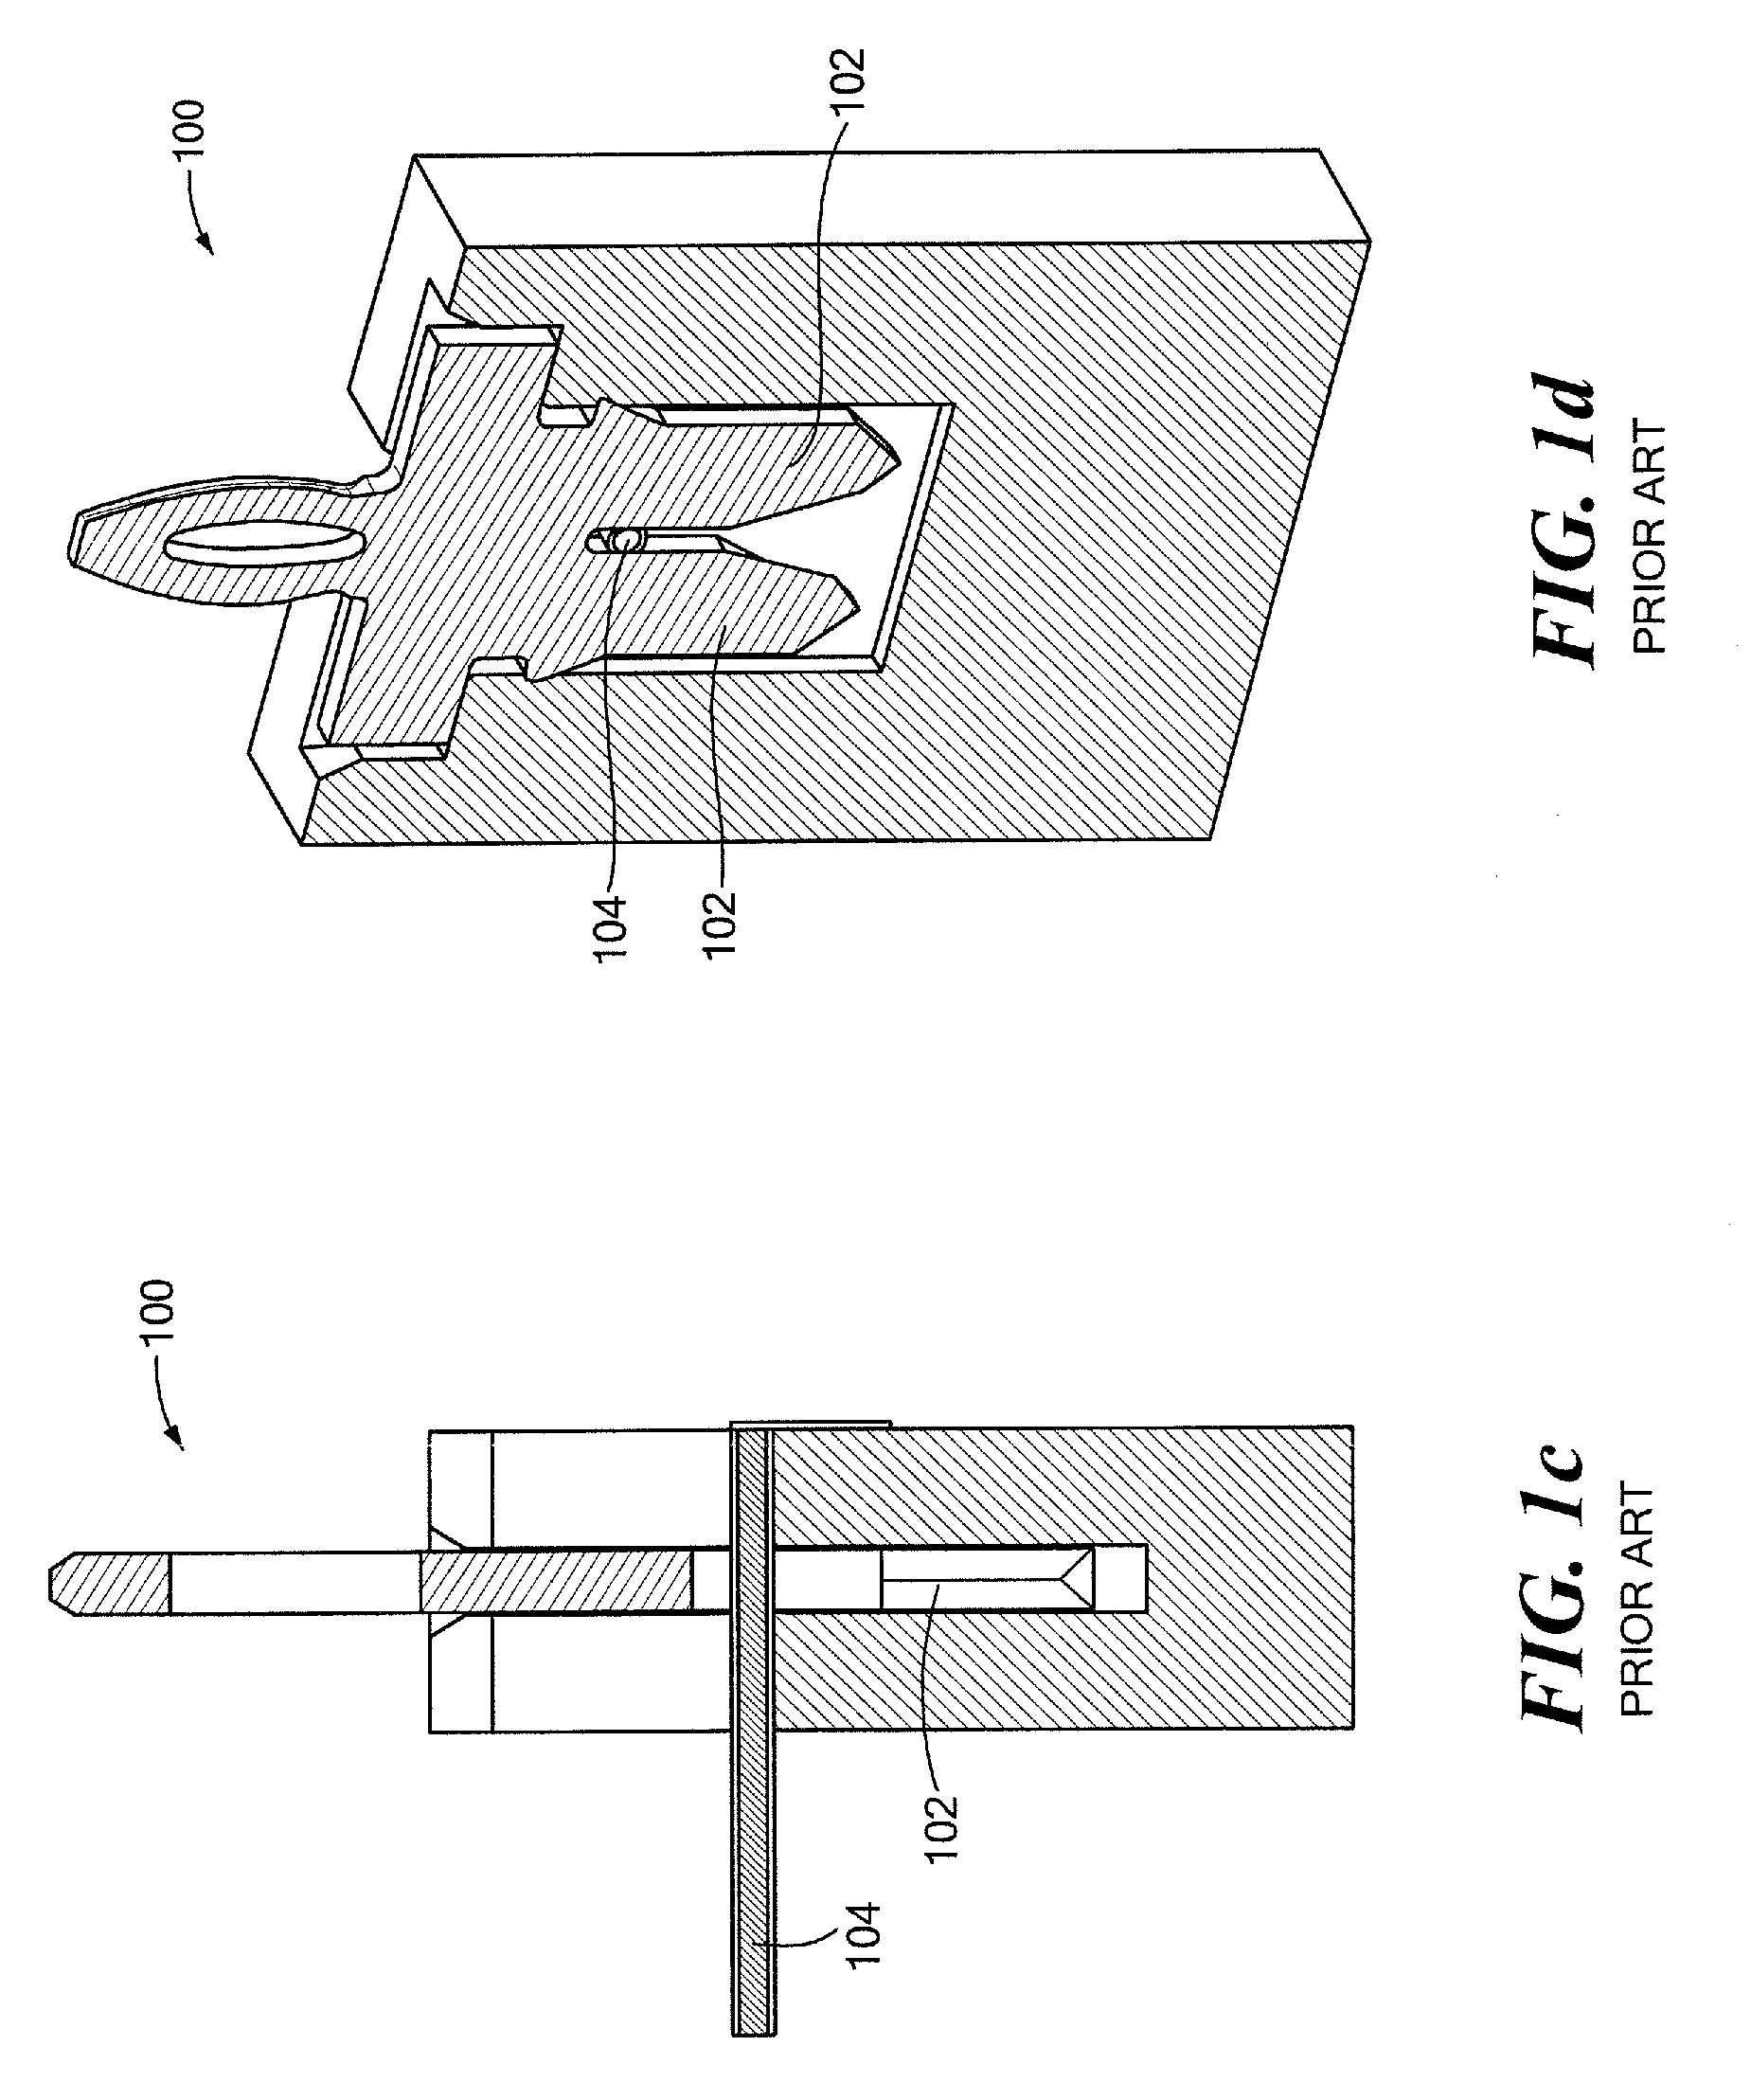 Large deflection constrained insulation displacement terminal and connector